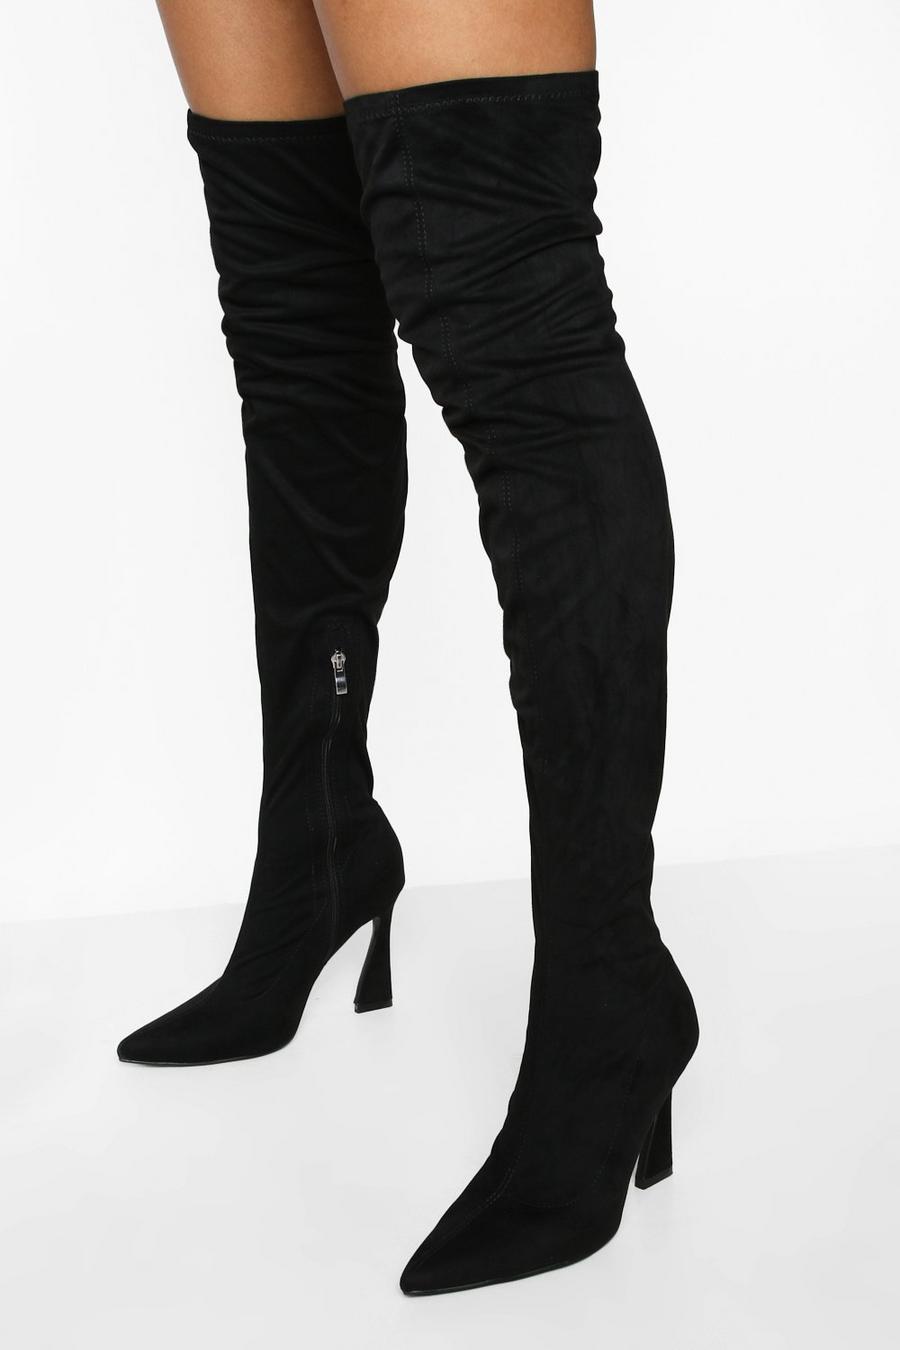 Black Wide Fit Pointed Toe Over The Knee Boot